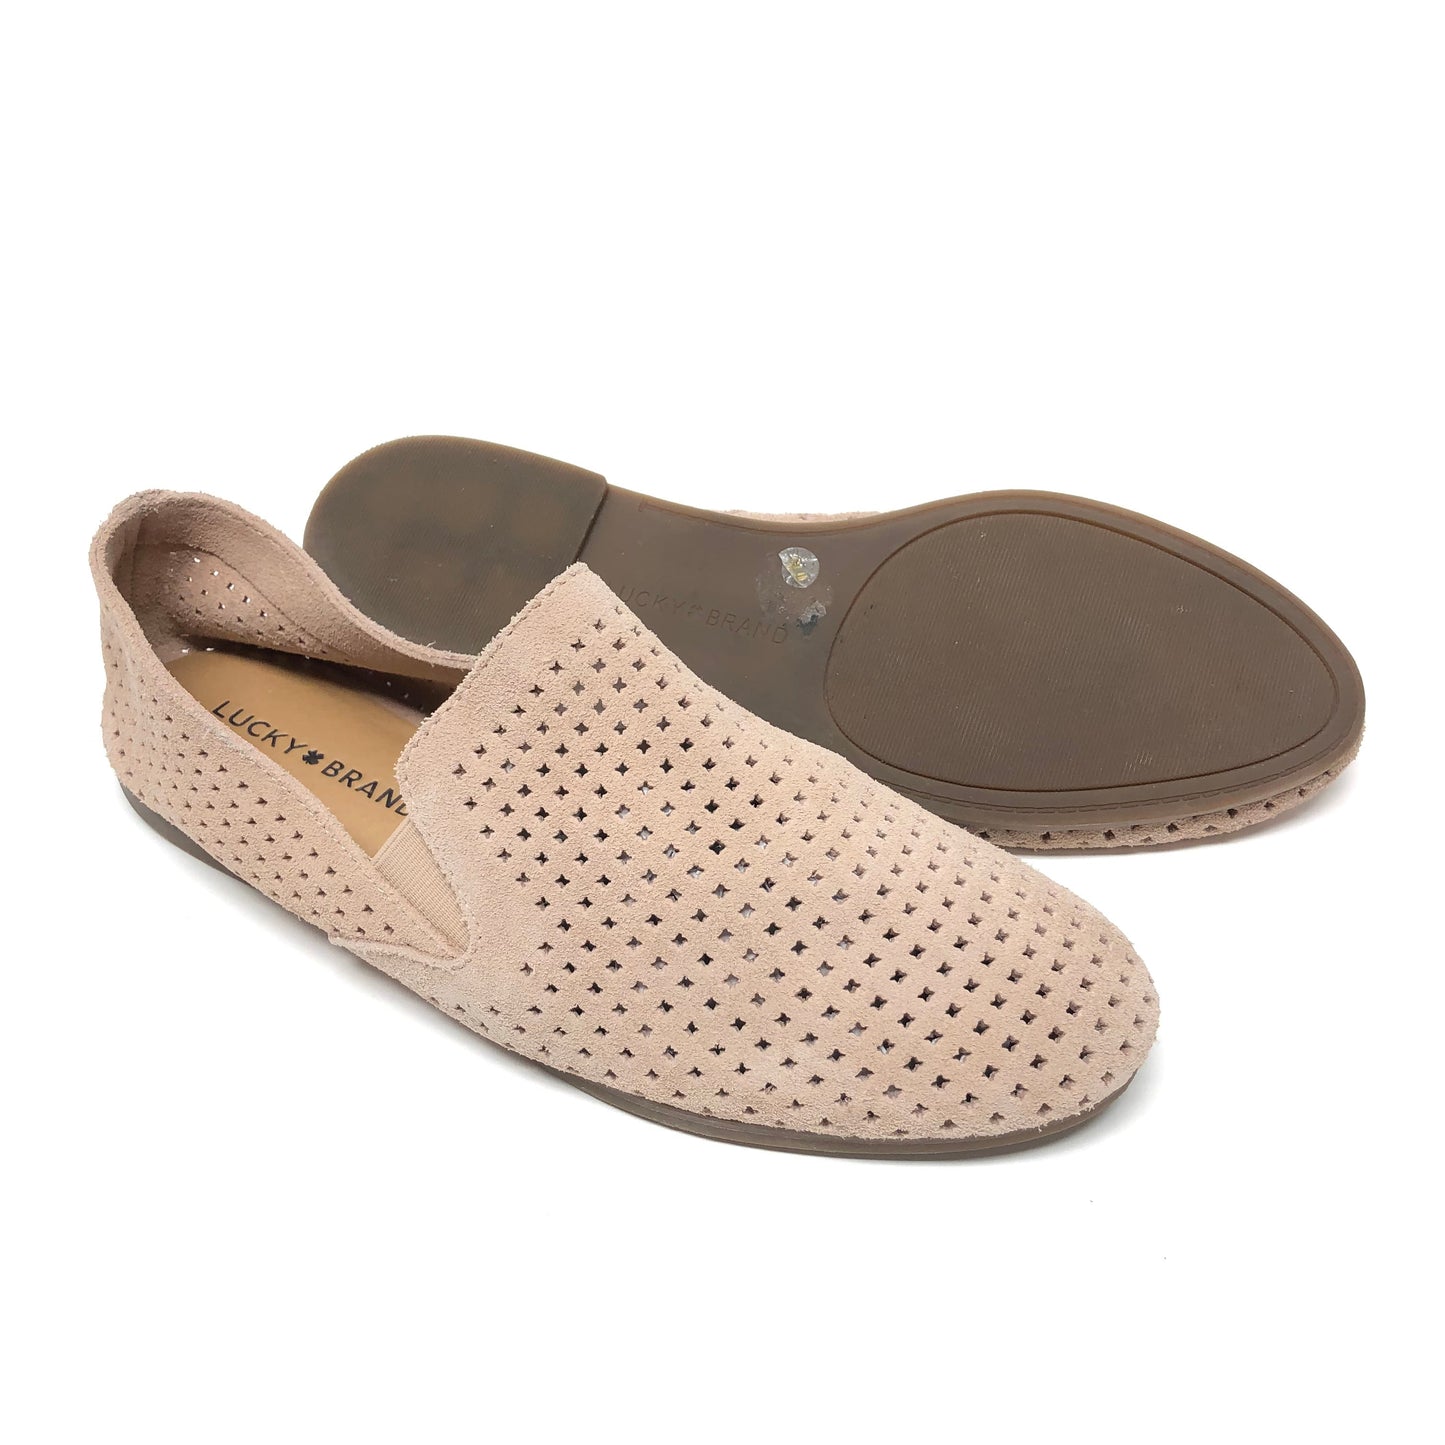 Beige Shoes Flats Lucky Brand, Size 9